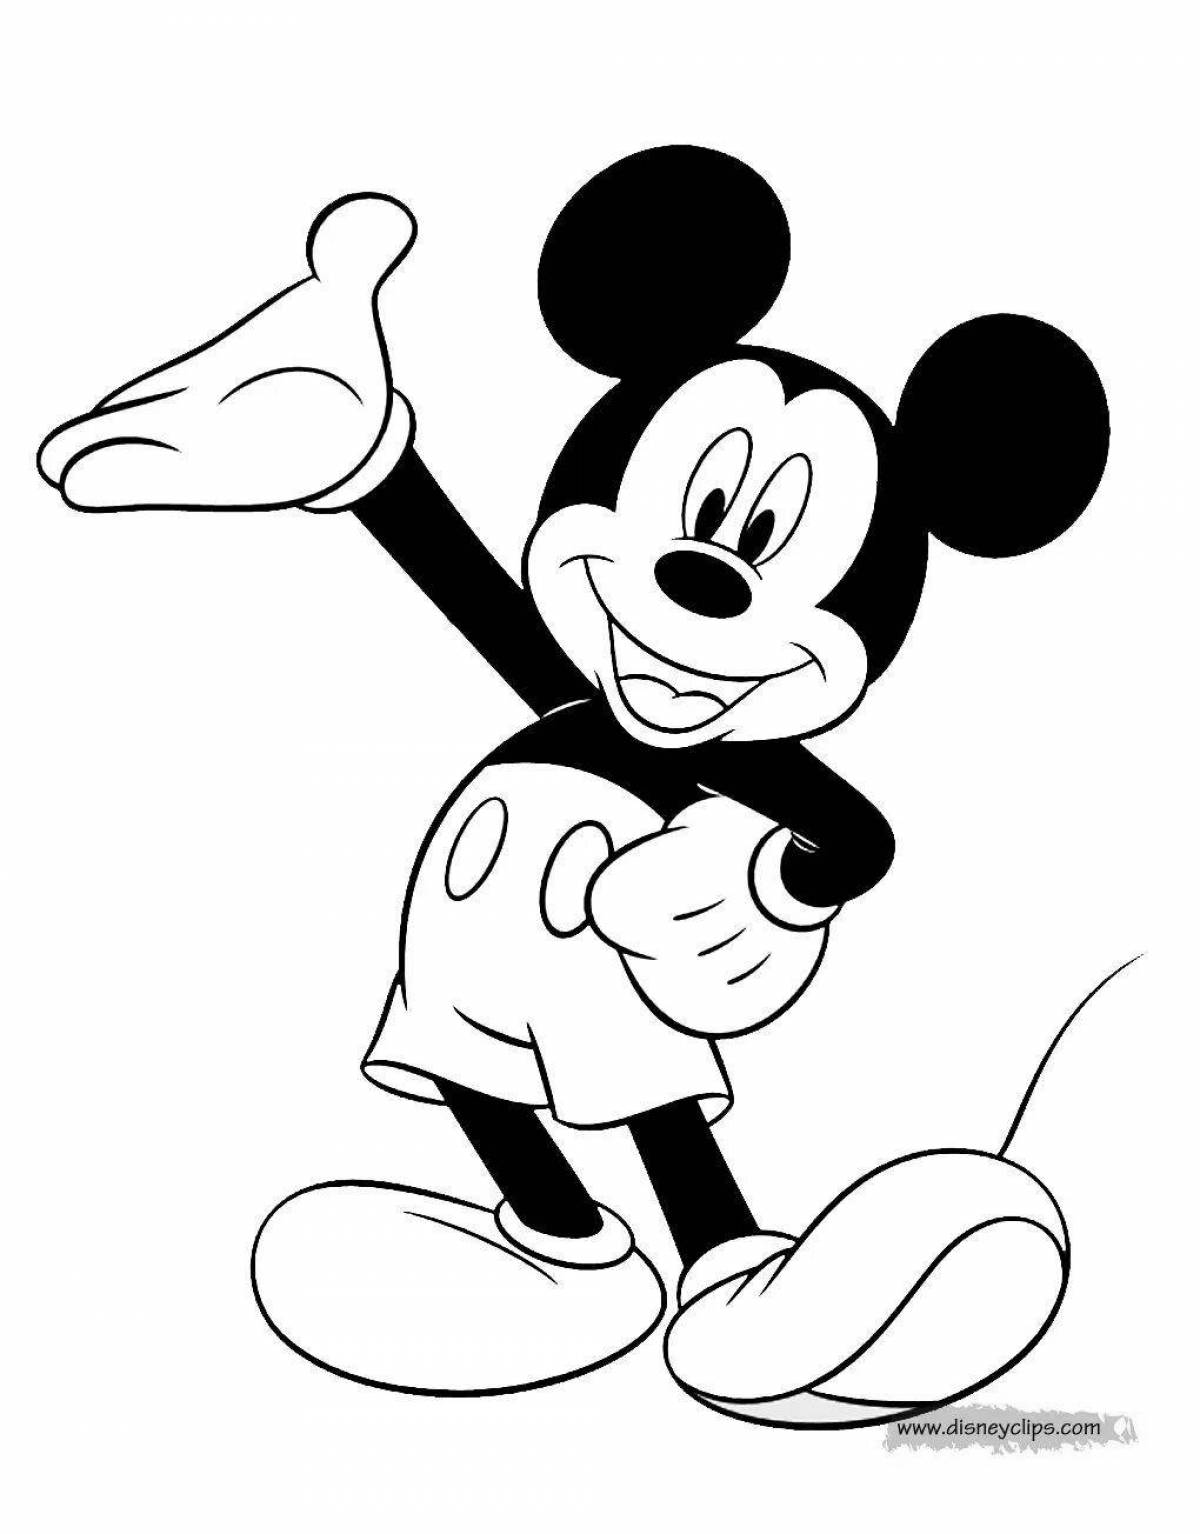 Sweet mouse cartoon coloring book